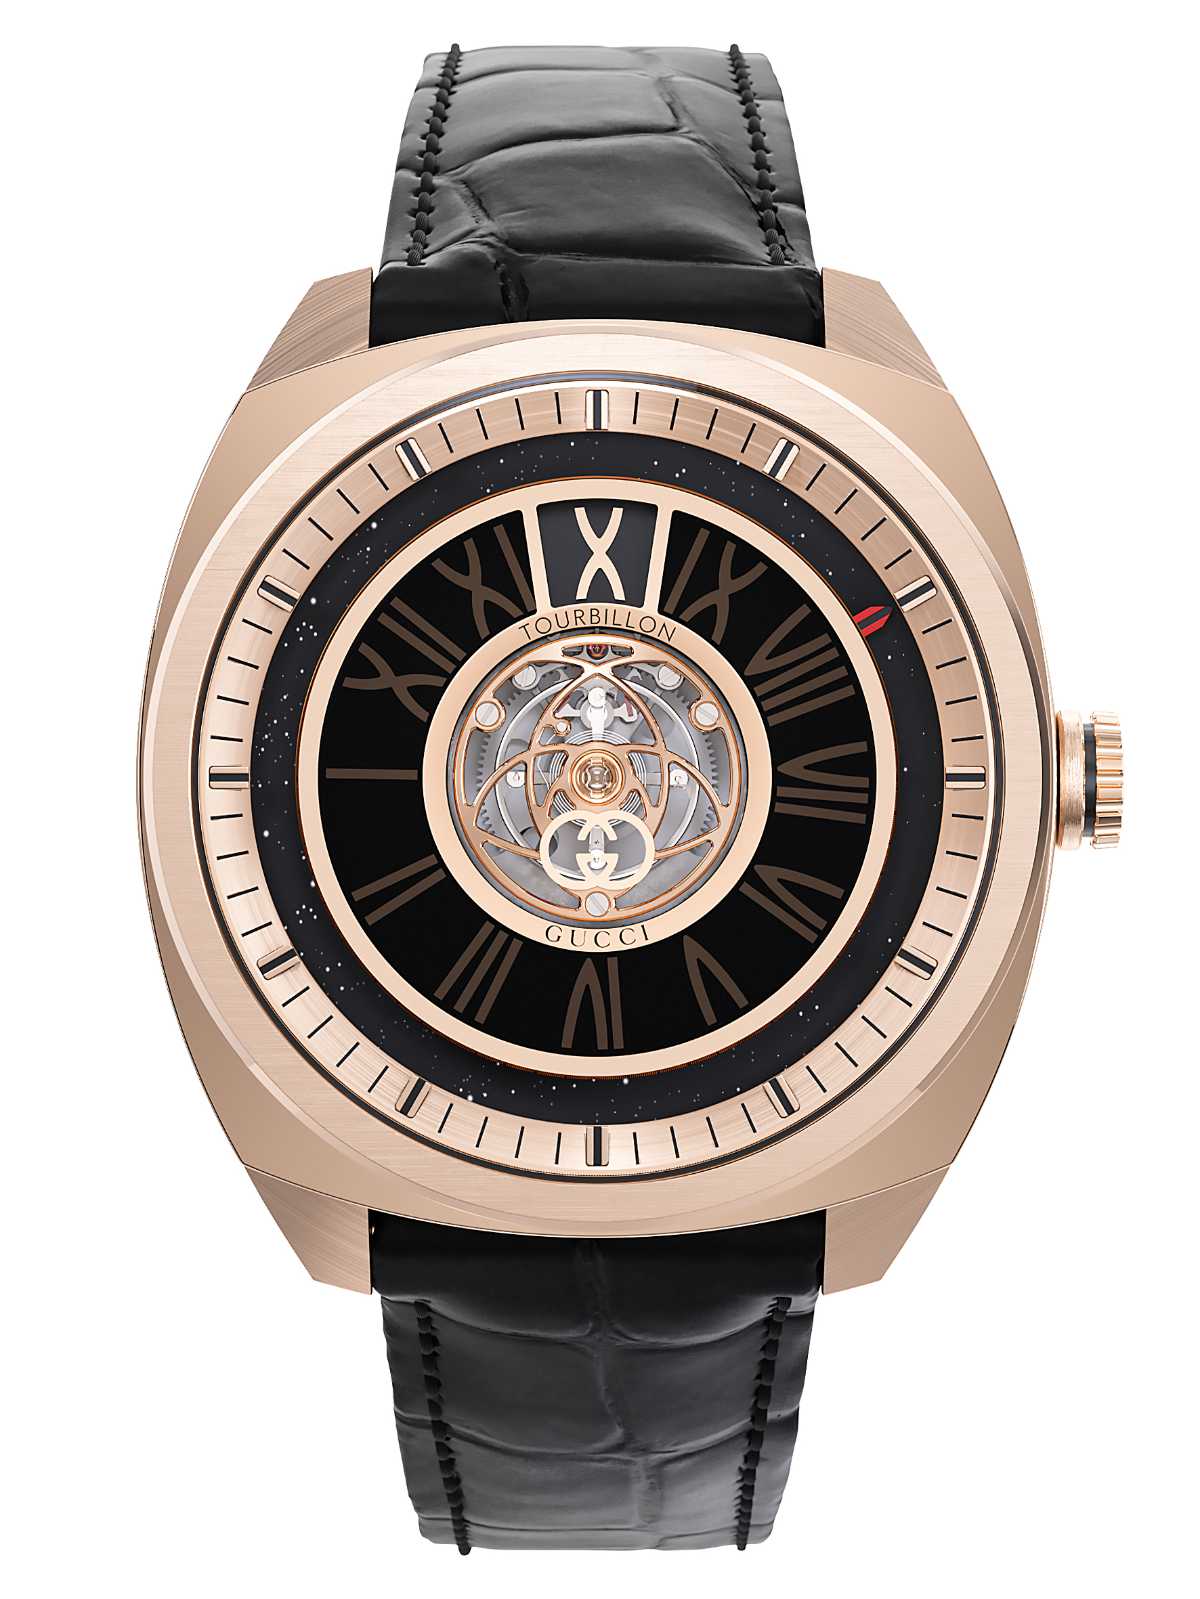 Gucci High Watchmaking Reaches Unprecedented Heights With New Complications